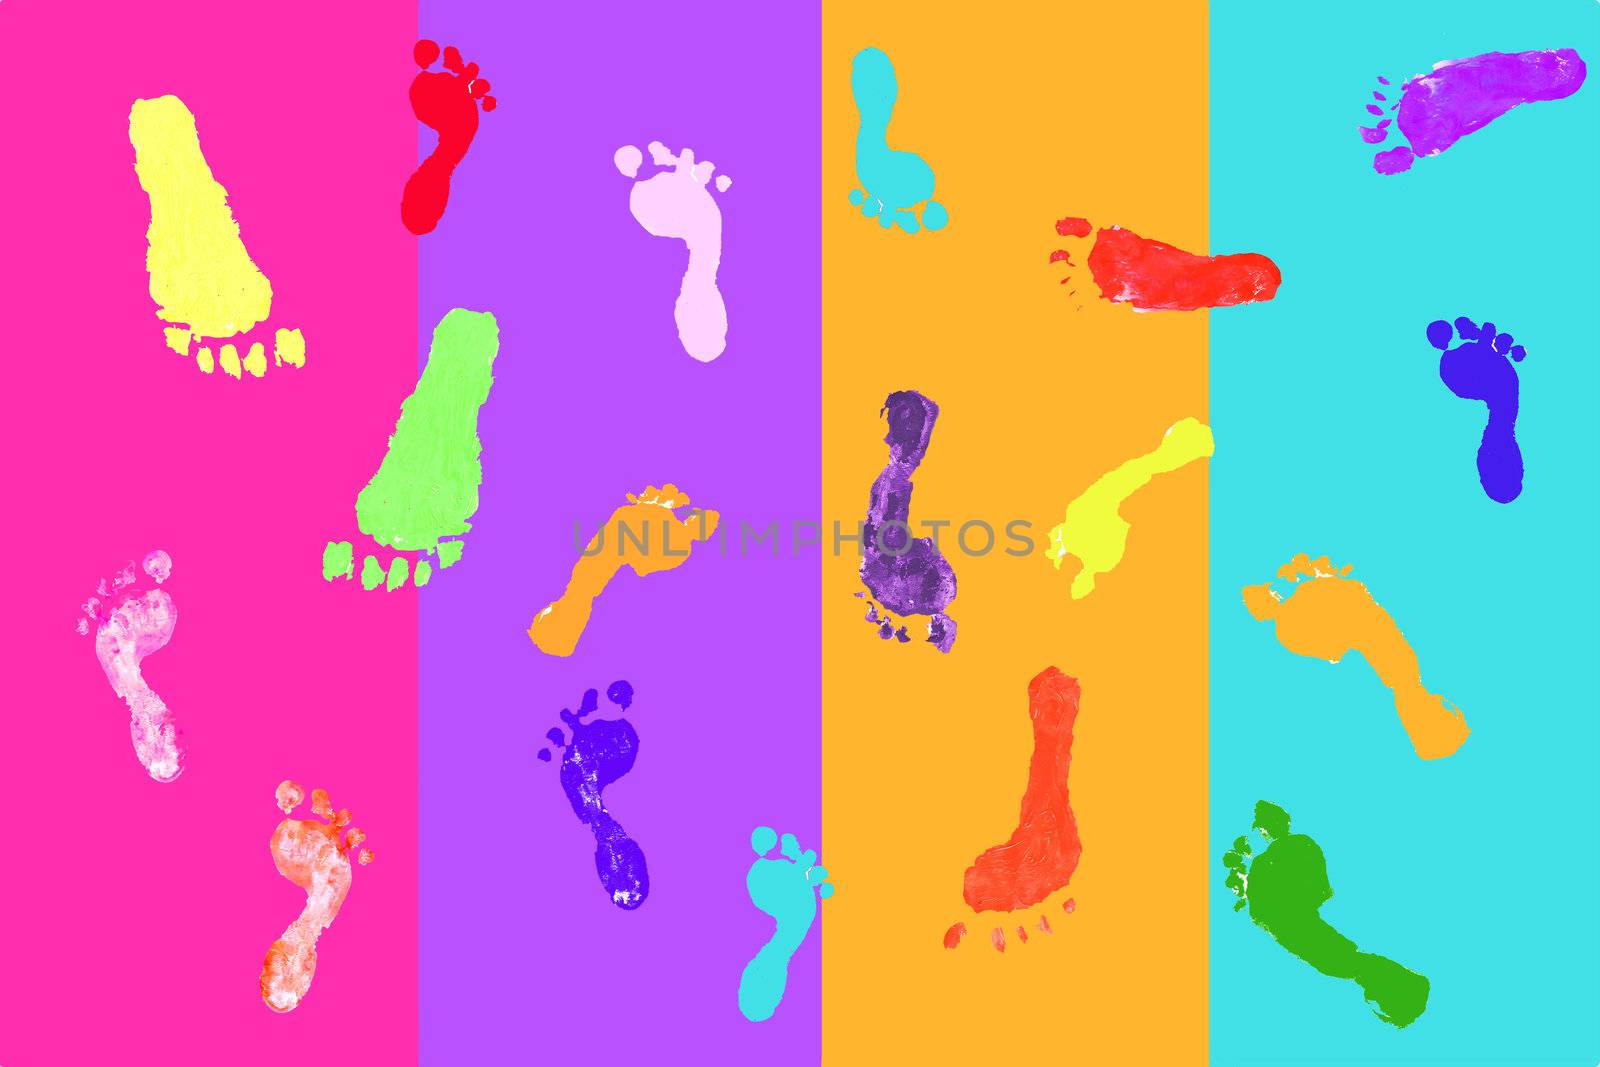 Actual footprints made by children on colorful background by jarenwicklund